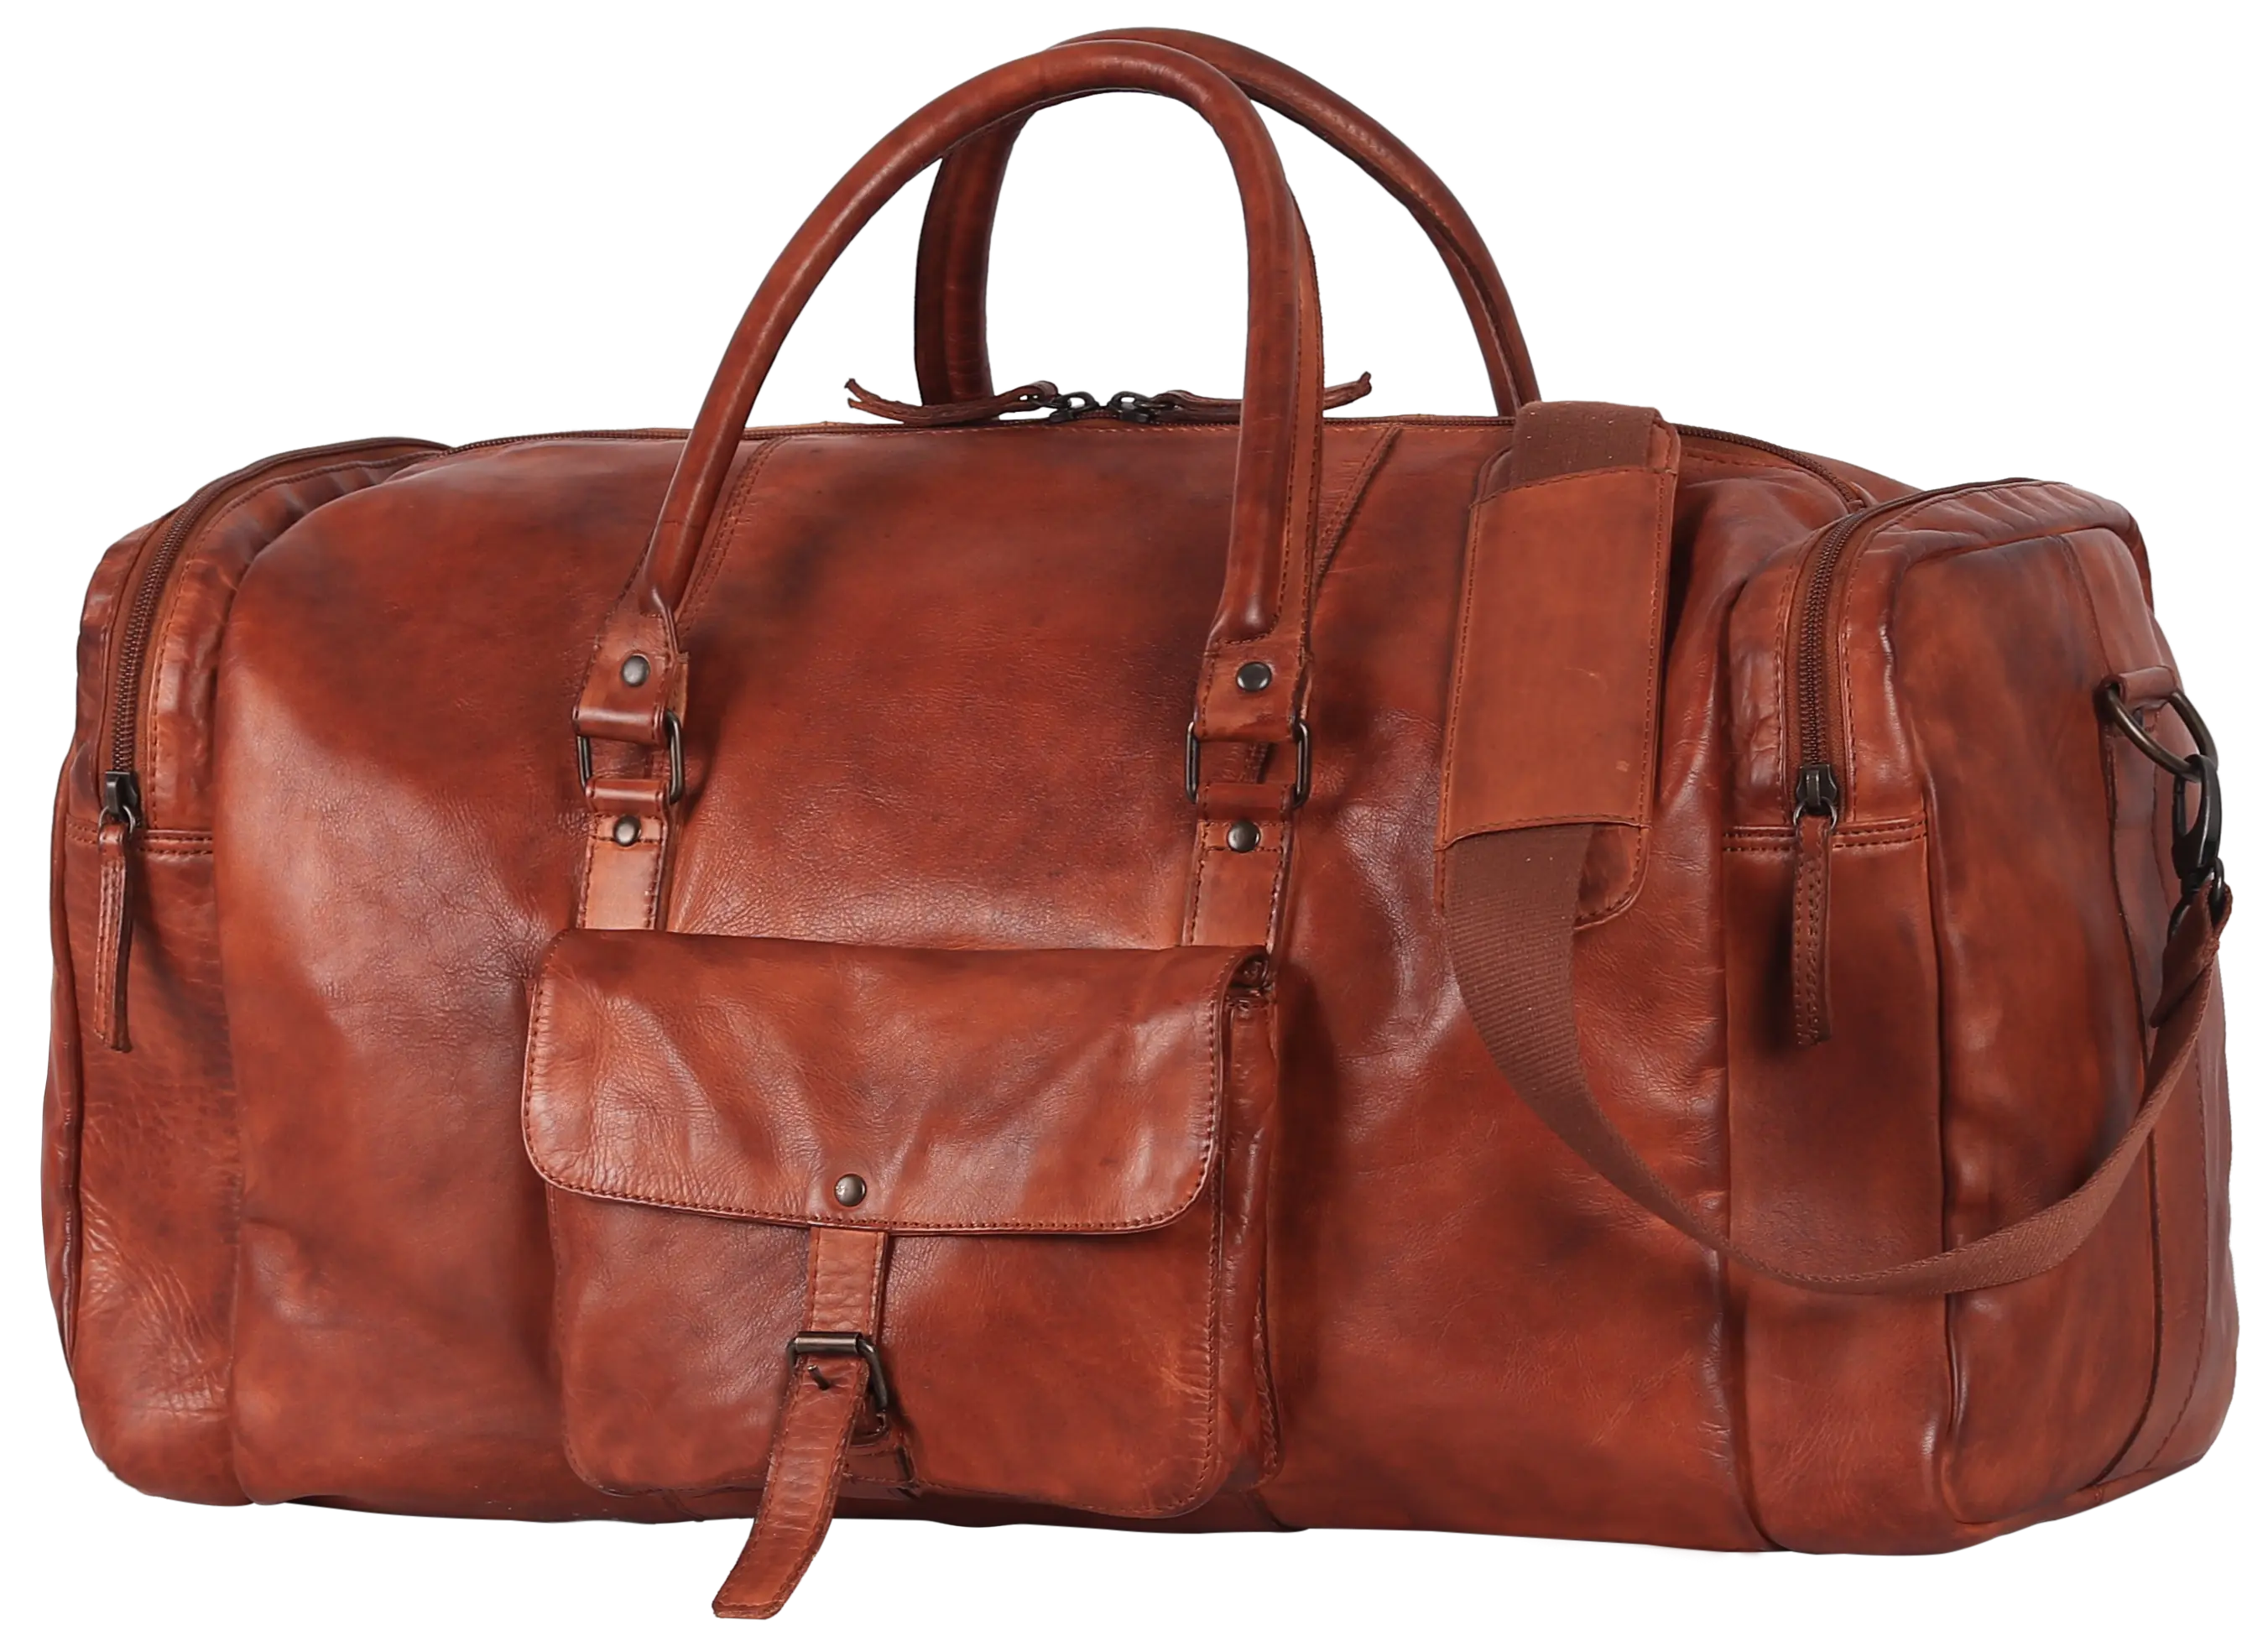 BOL/Open Road 5 Pocket Leather Duffle Bag Backpacks & Messenger Bags Boutique of Leathers/Open Road